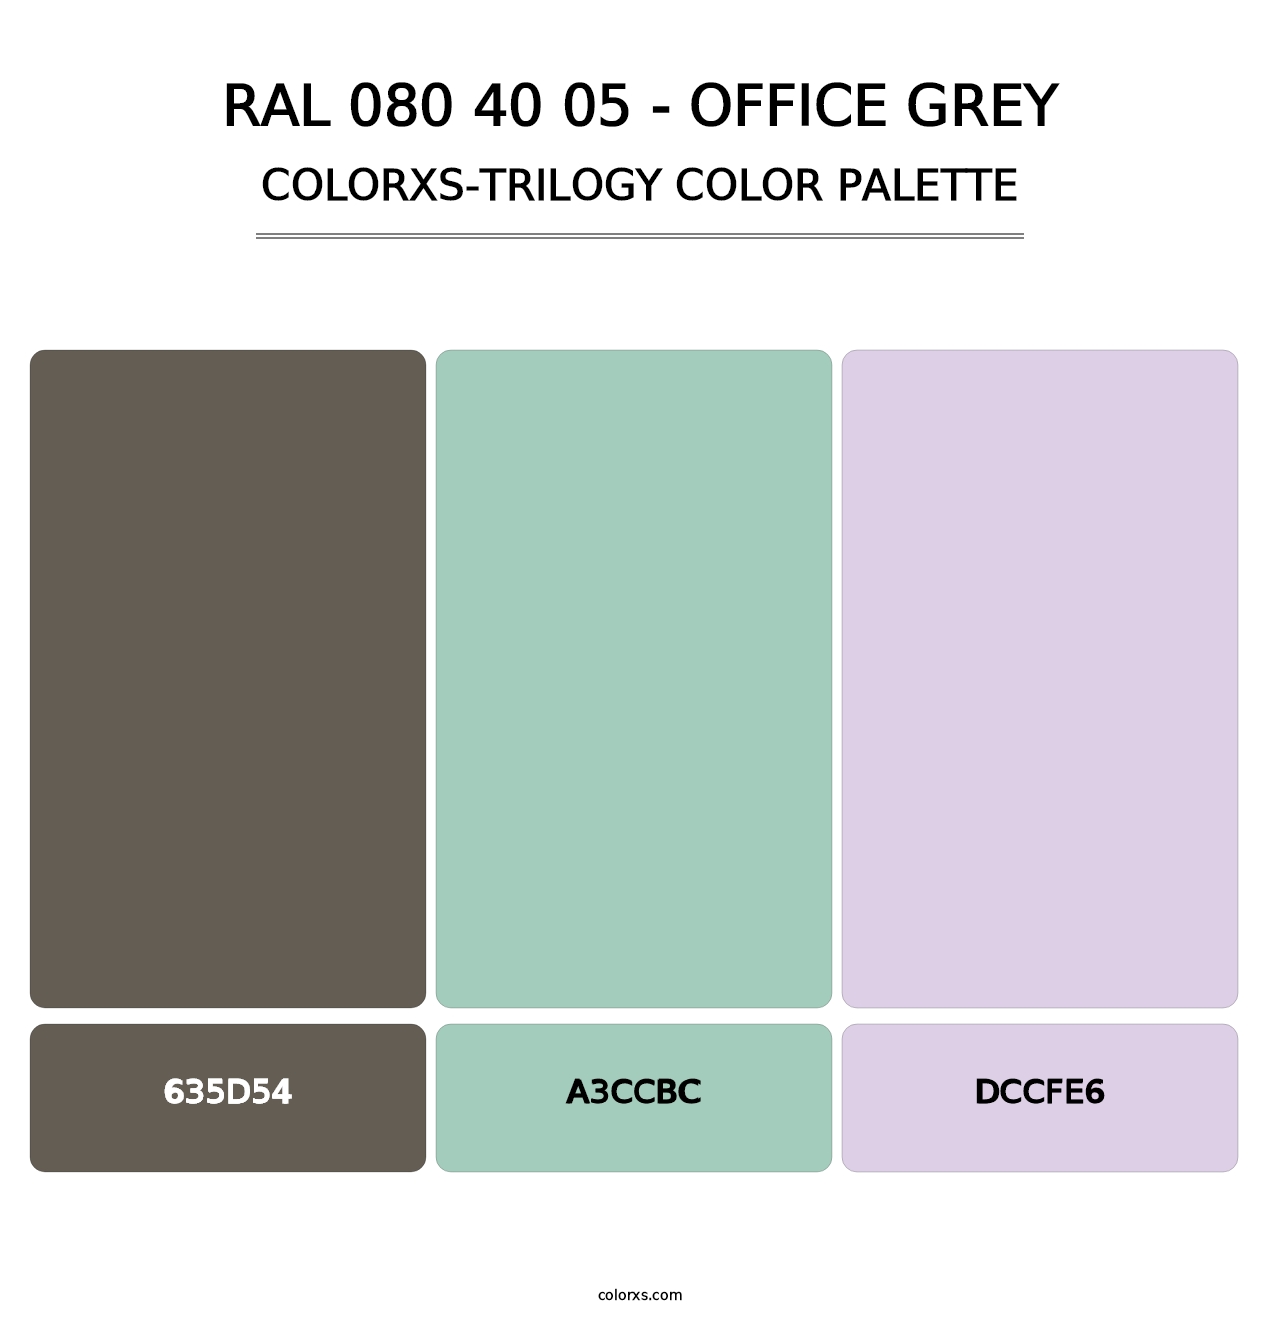 RAL 080 40 05 - Office Grey - Colorxs Trilogy Palette